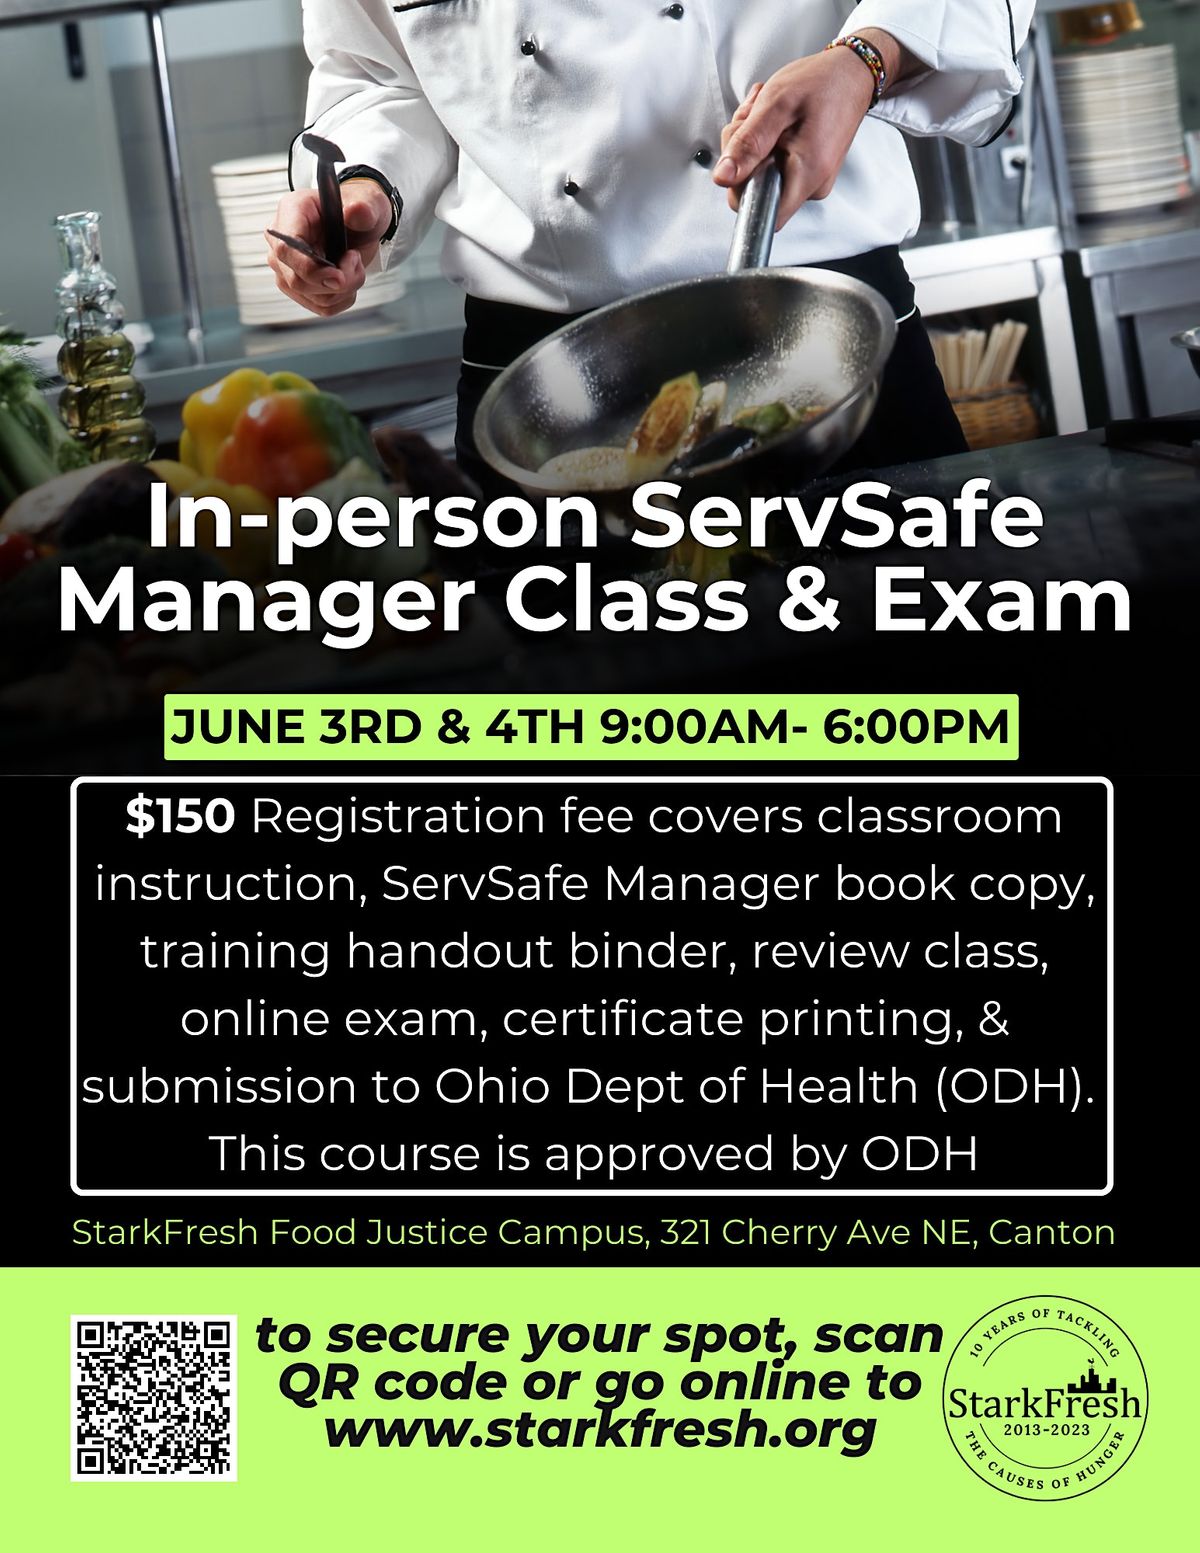 In-person ServSafe Manager-level Class & Exam